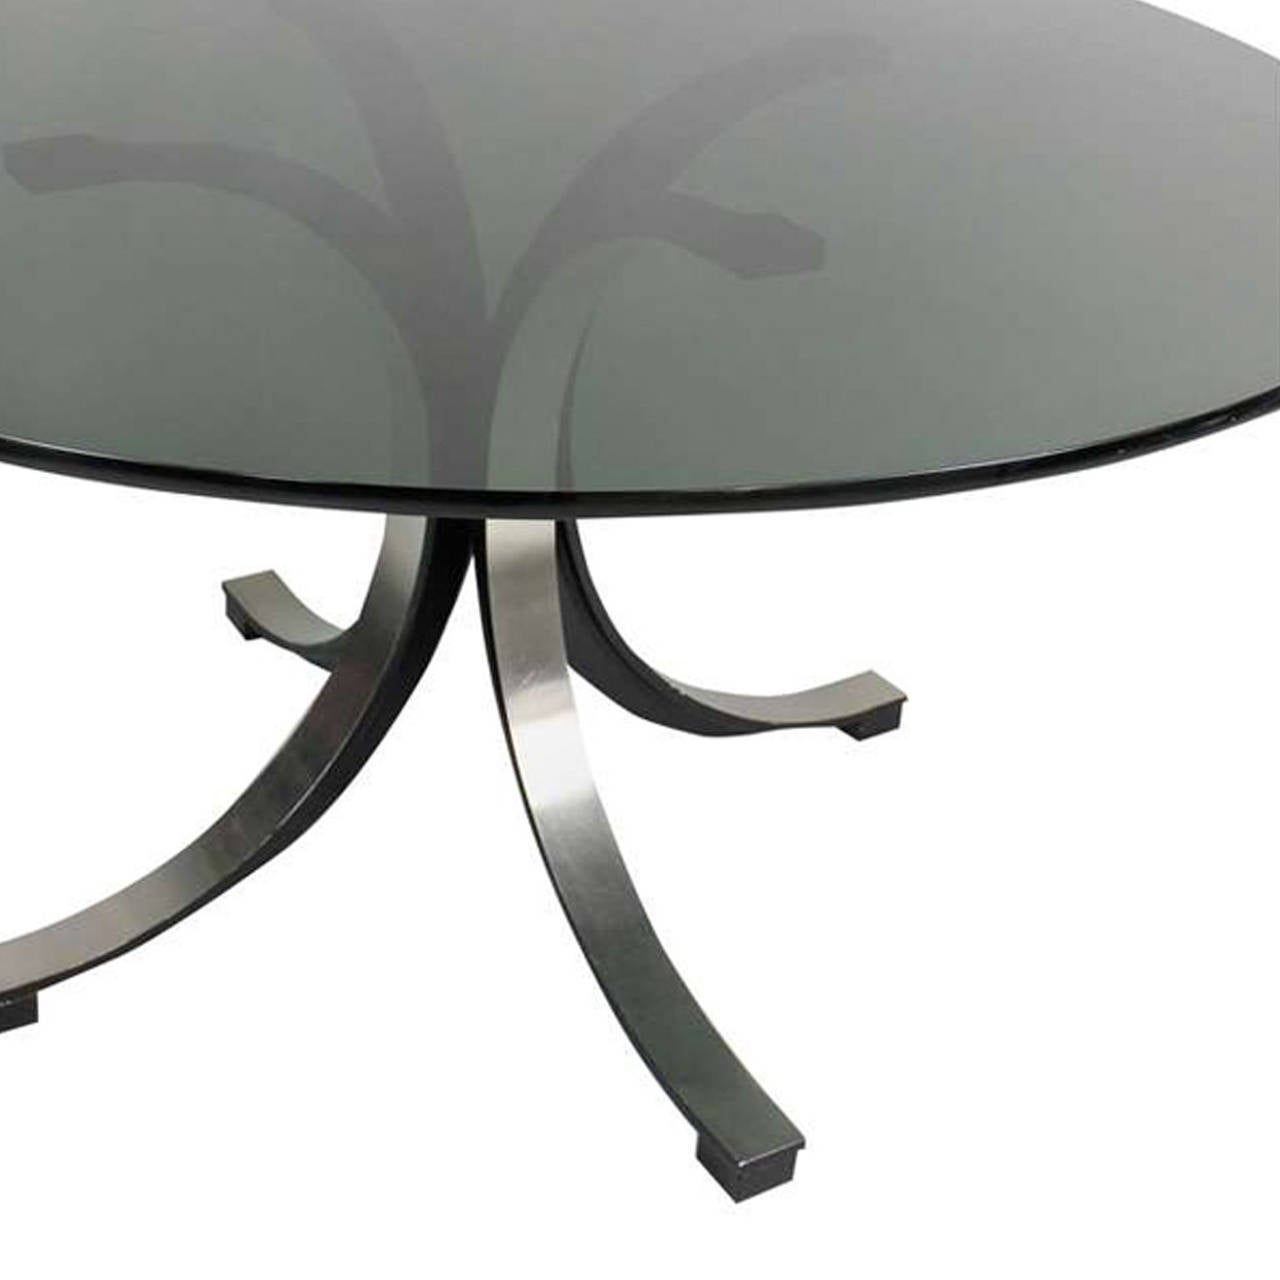 Pedestal table designed by Osvaldo Borsani and Eugenio Berli edited by Tecno, made in black lacquer metal finished in steel gusset with smoked black crystal on top.